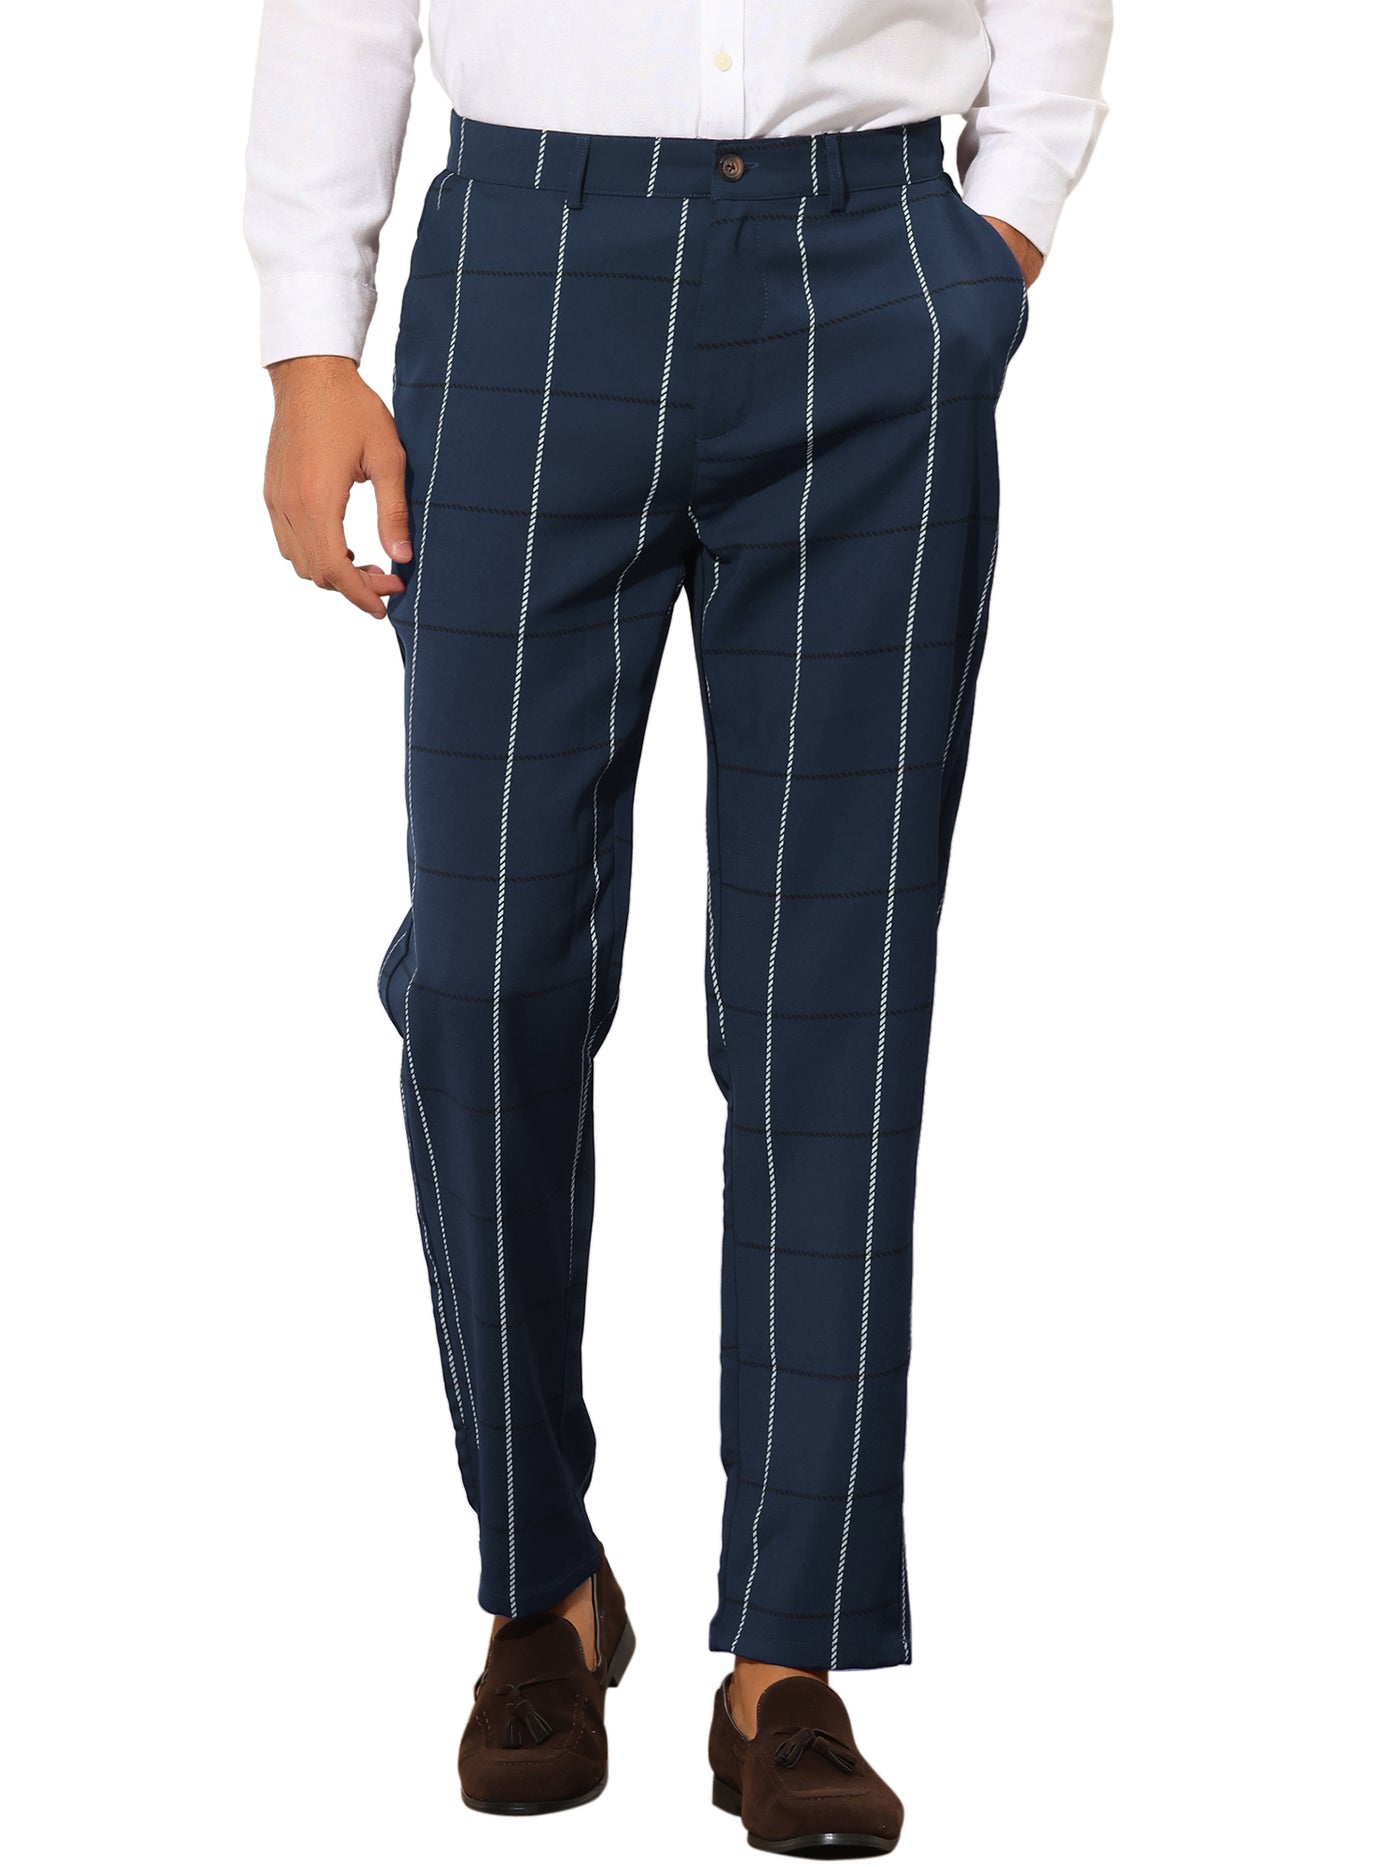 Bublédon Plaid Dress Pants for Men's Regular Fit Tapered Checked Business Trousers